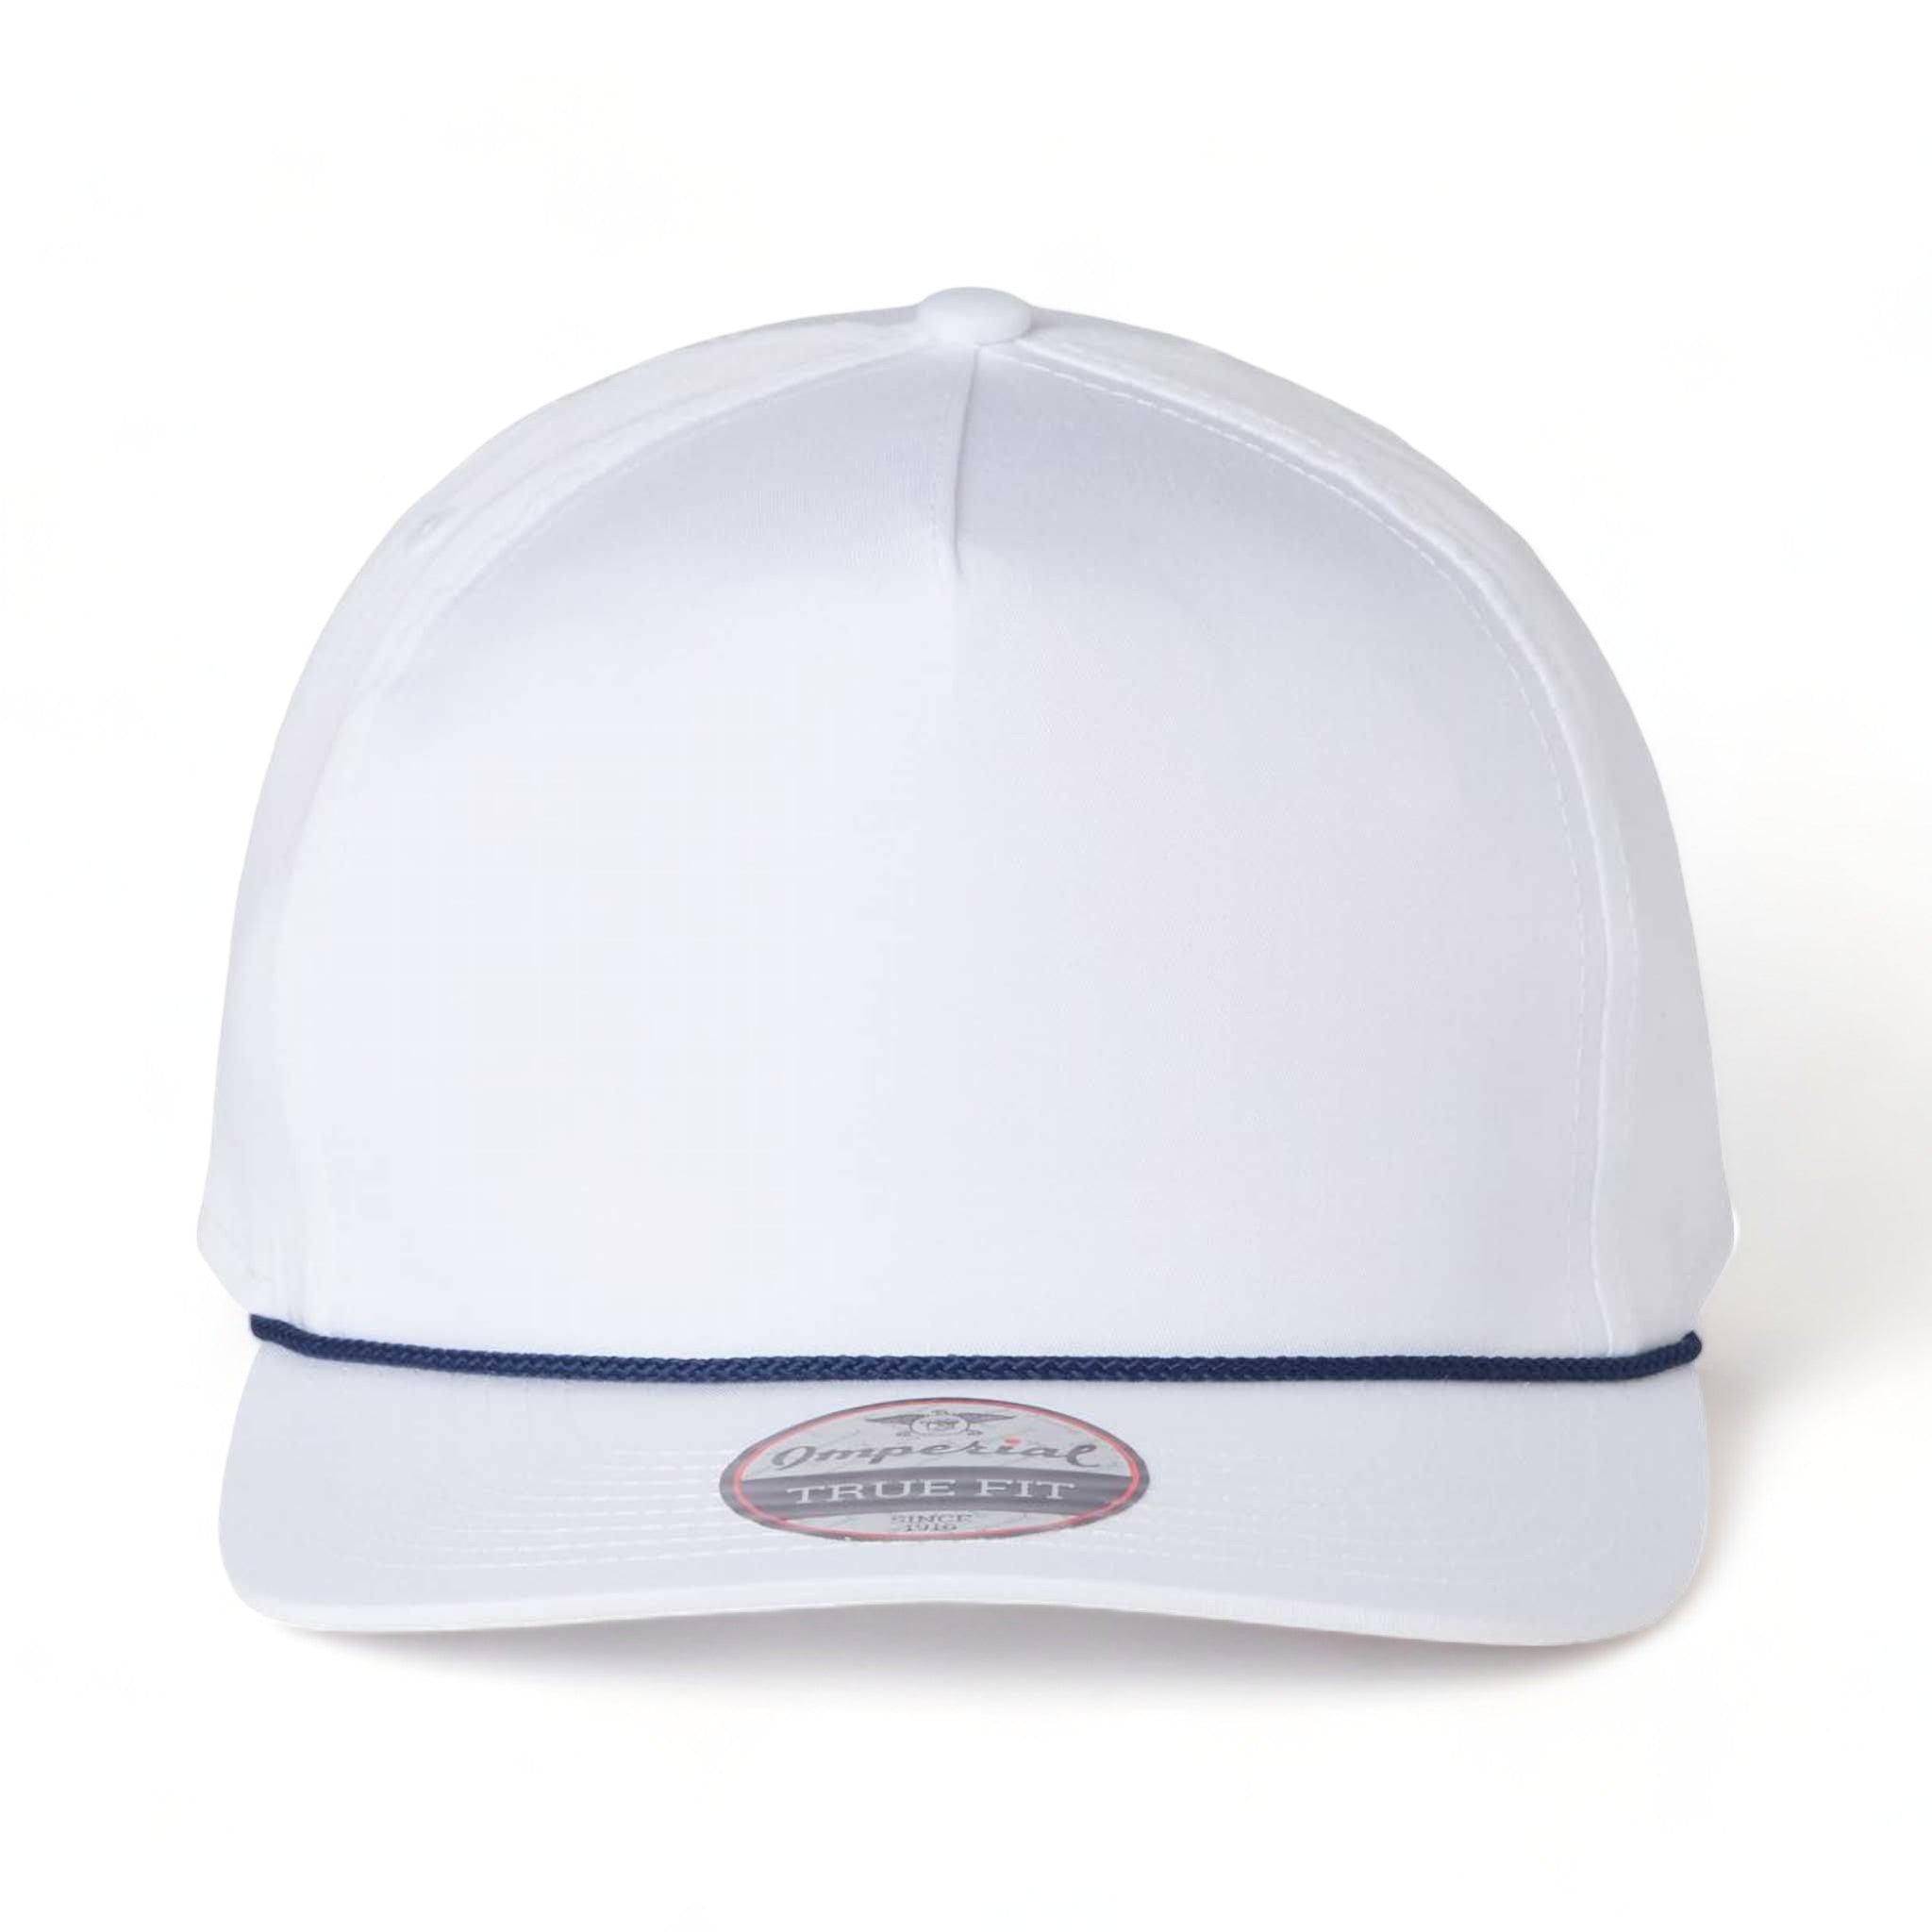 Front view of Imperial 5056 custom hat in white and navy